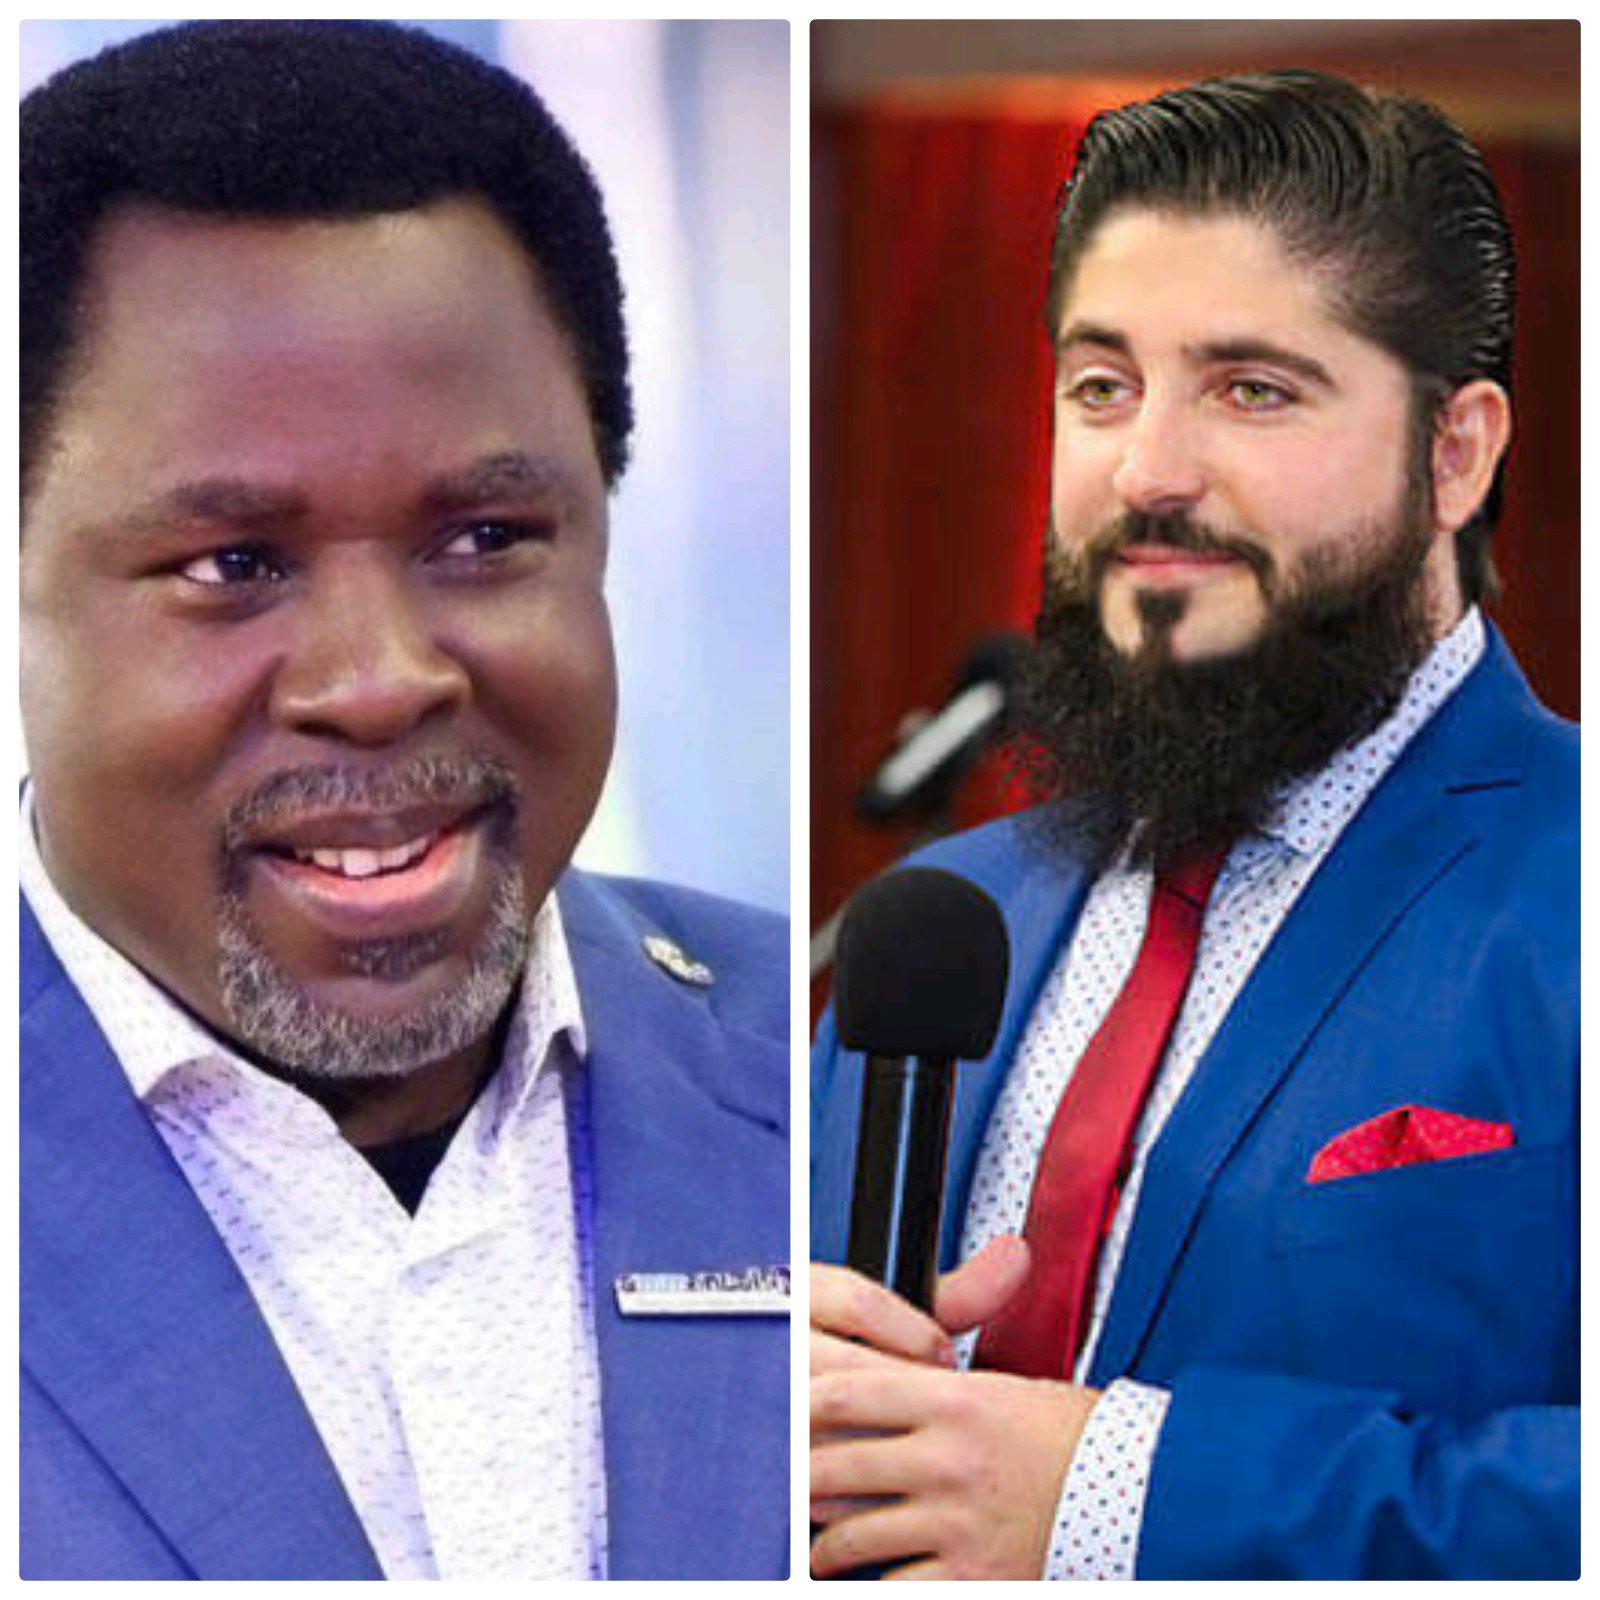 All Those Stories You Heard On The BBC Documentary About Pastor TB Joshua Were Not True—According to Harry